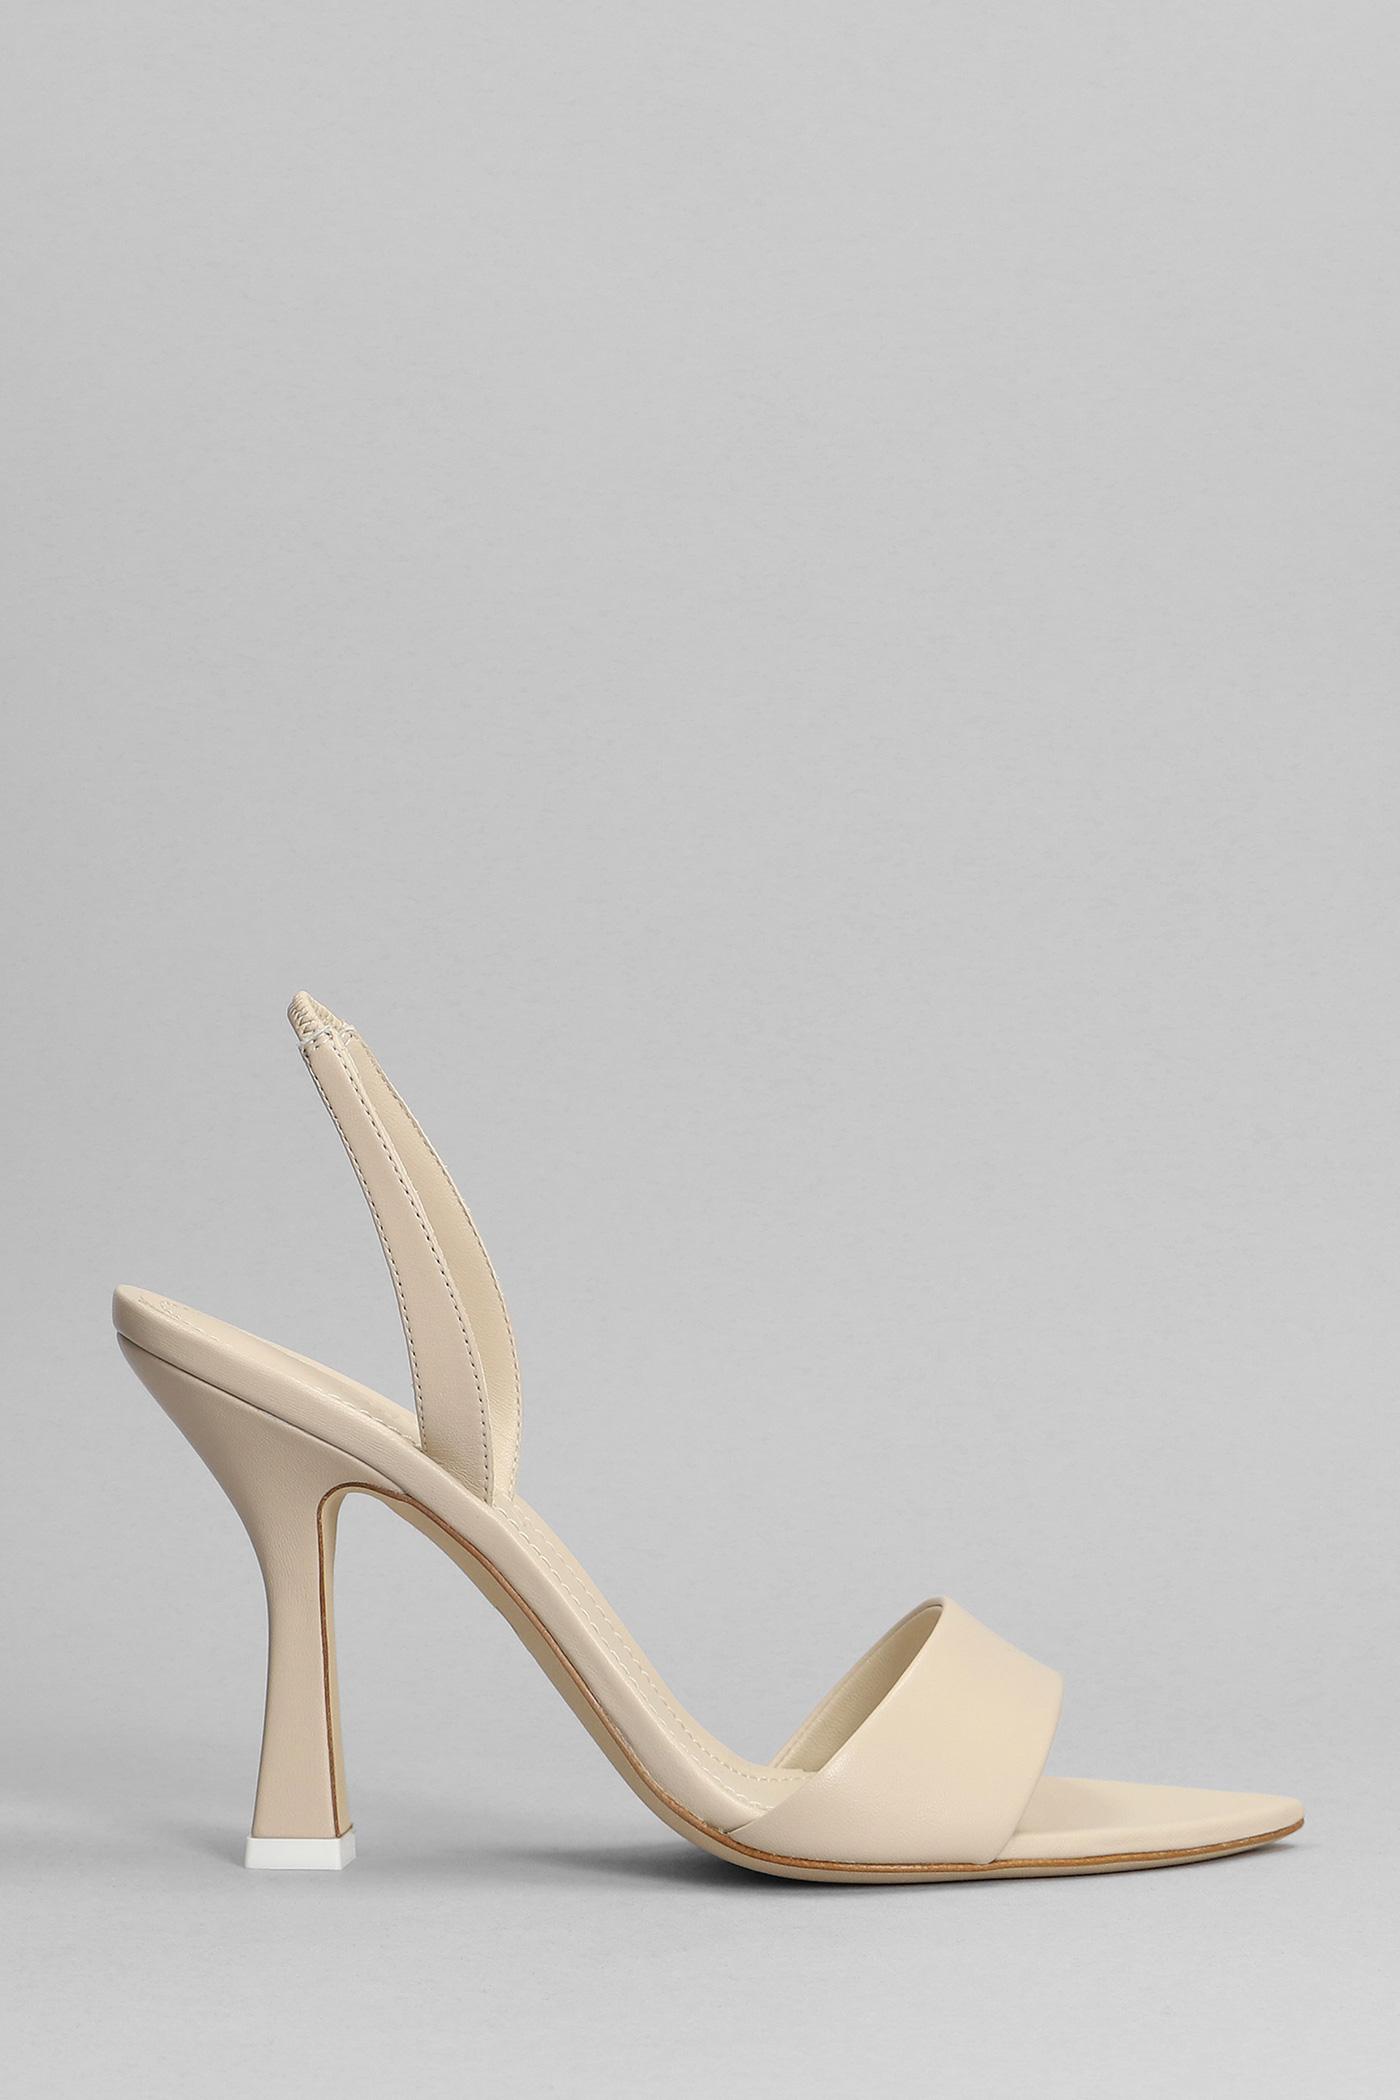 3Juin Lily 095 Sandals In Beige Leather in Natural | Lyst